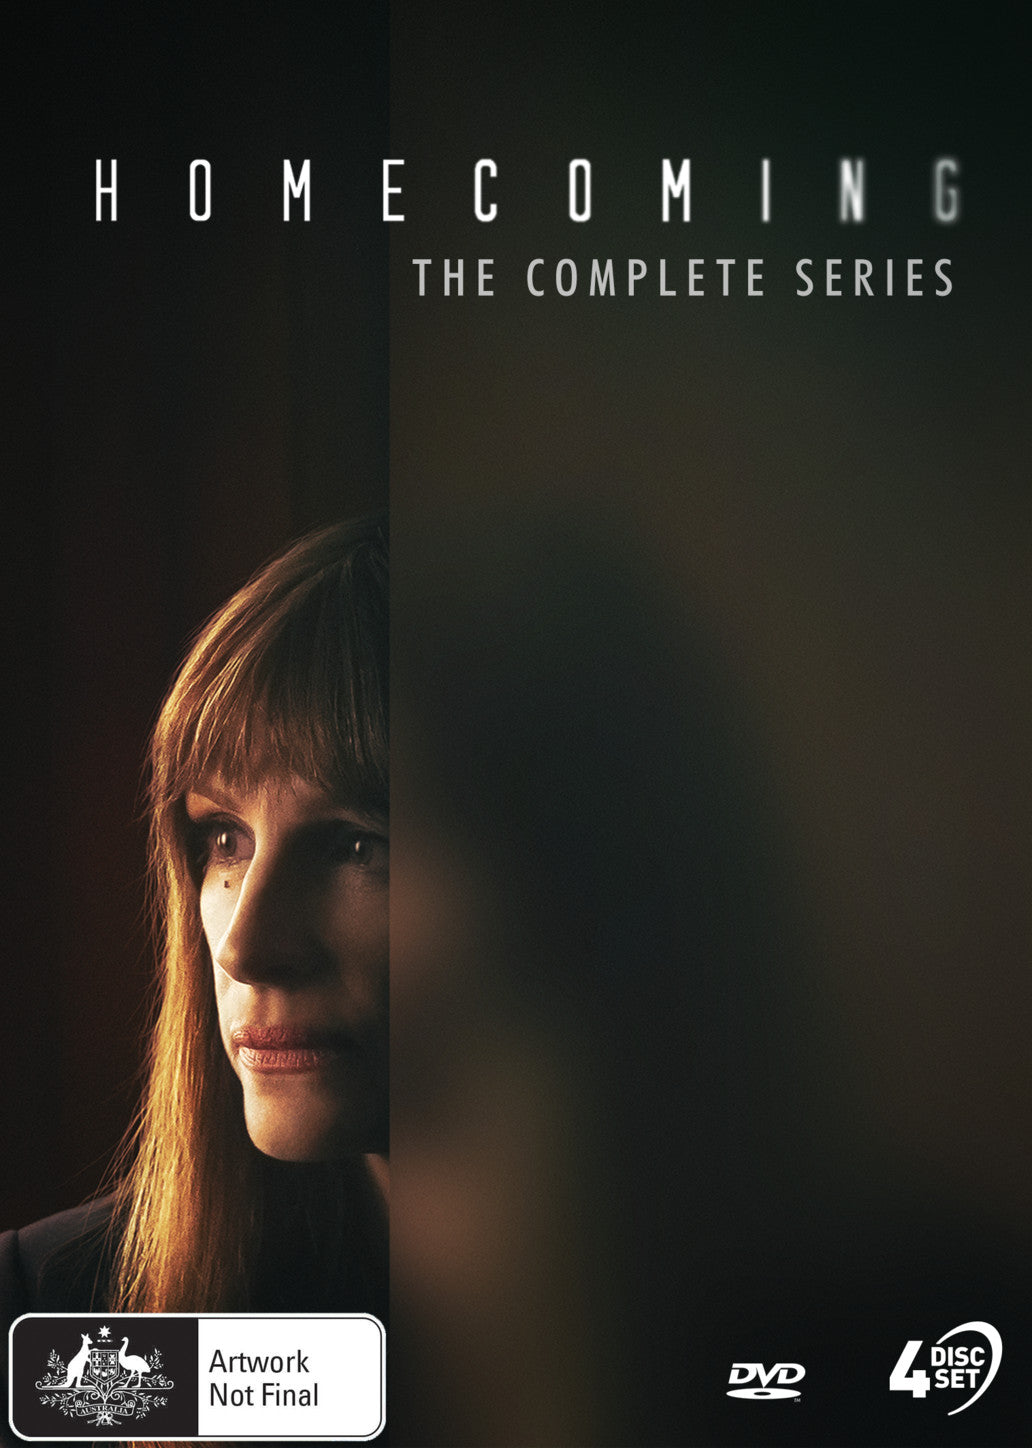 HOMECOMING: THE COMPLETE SERIES